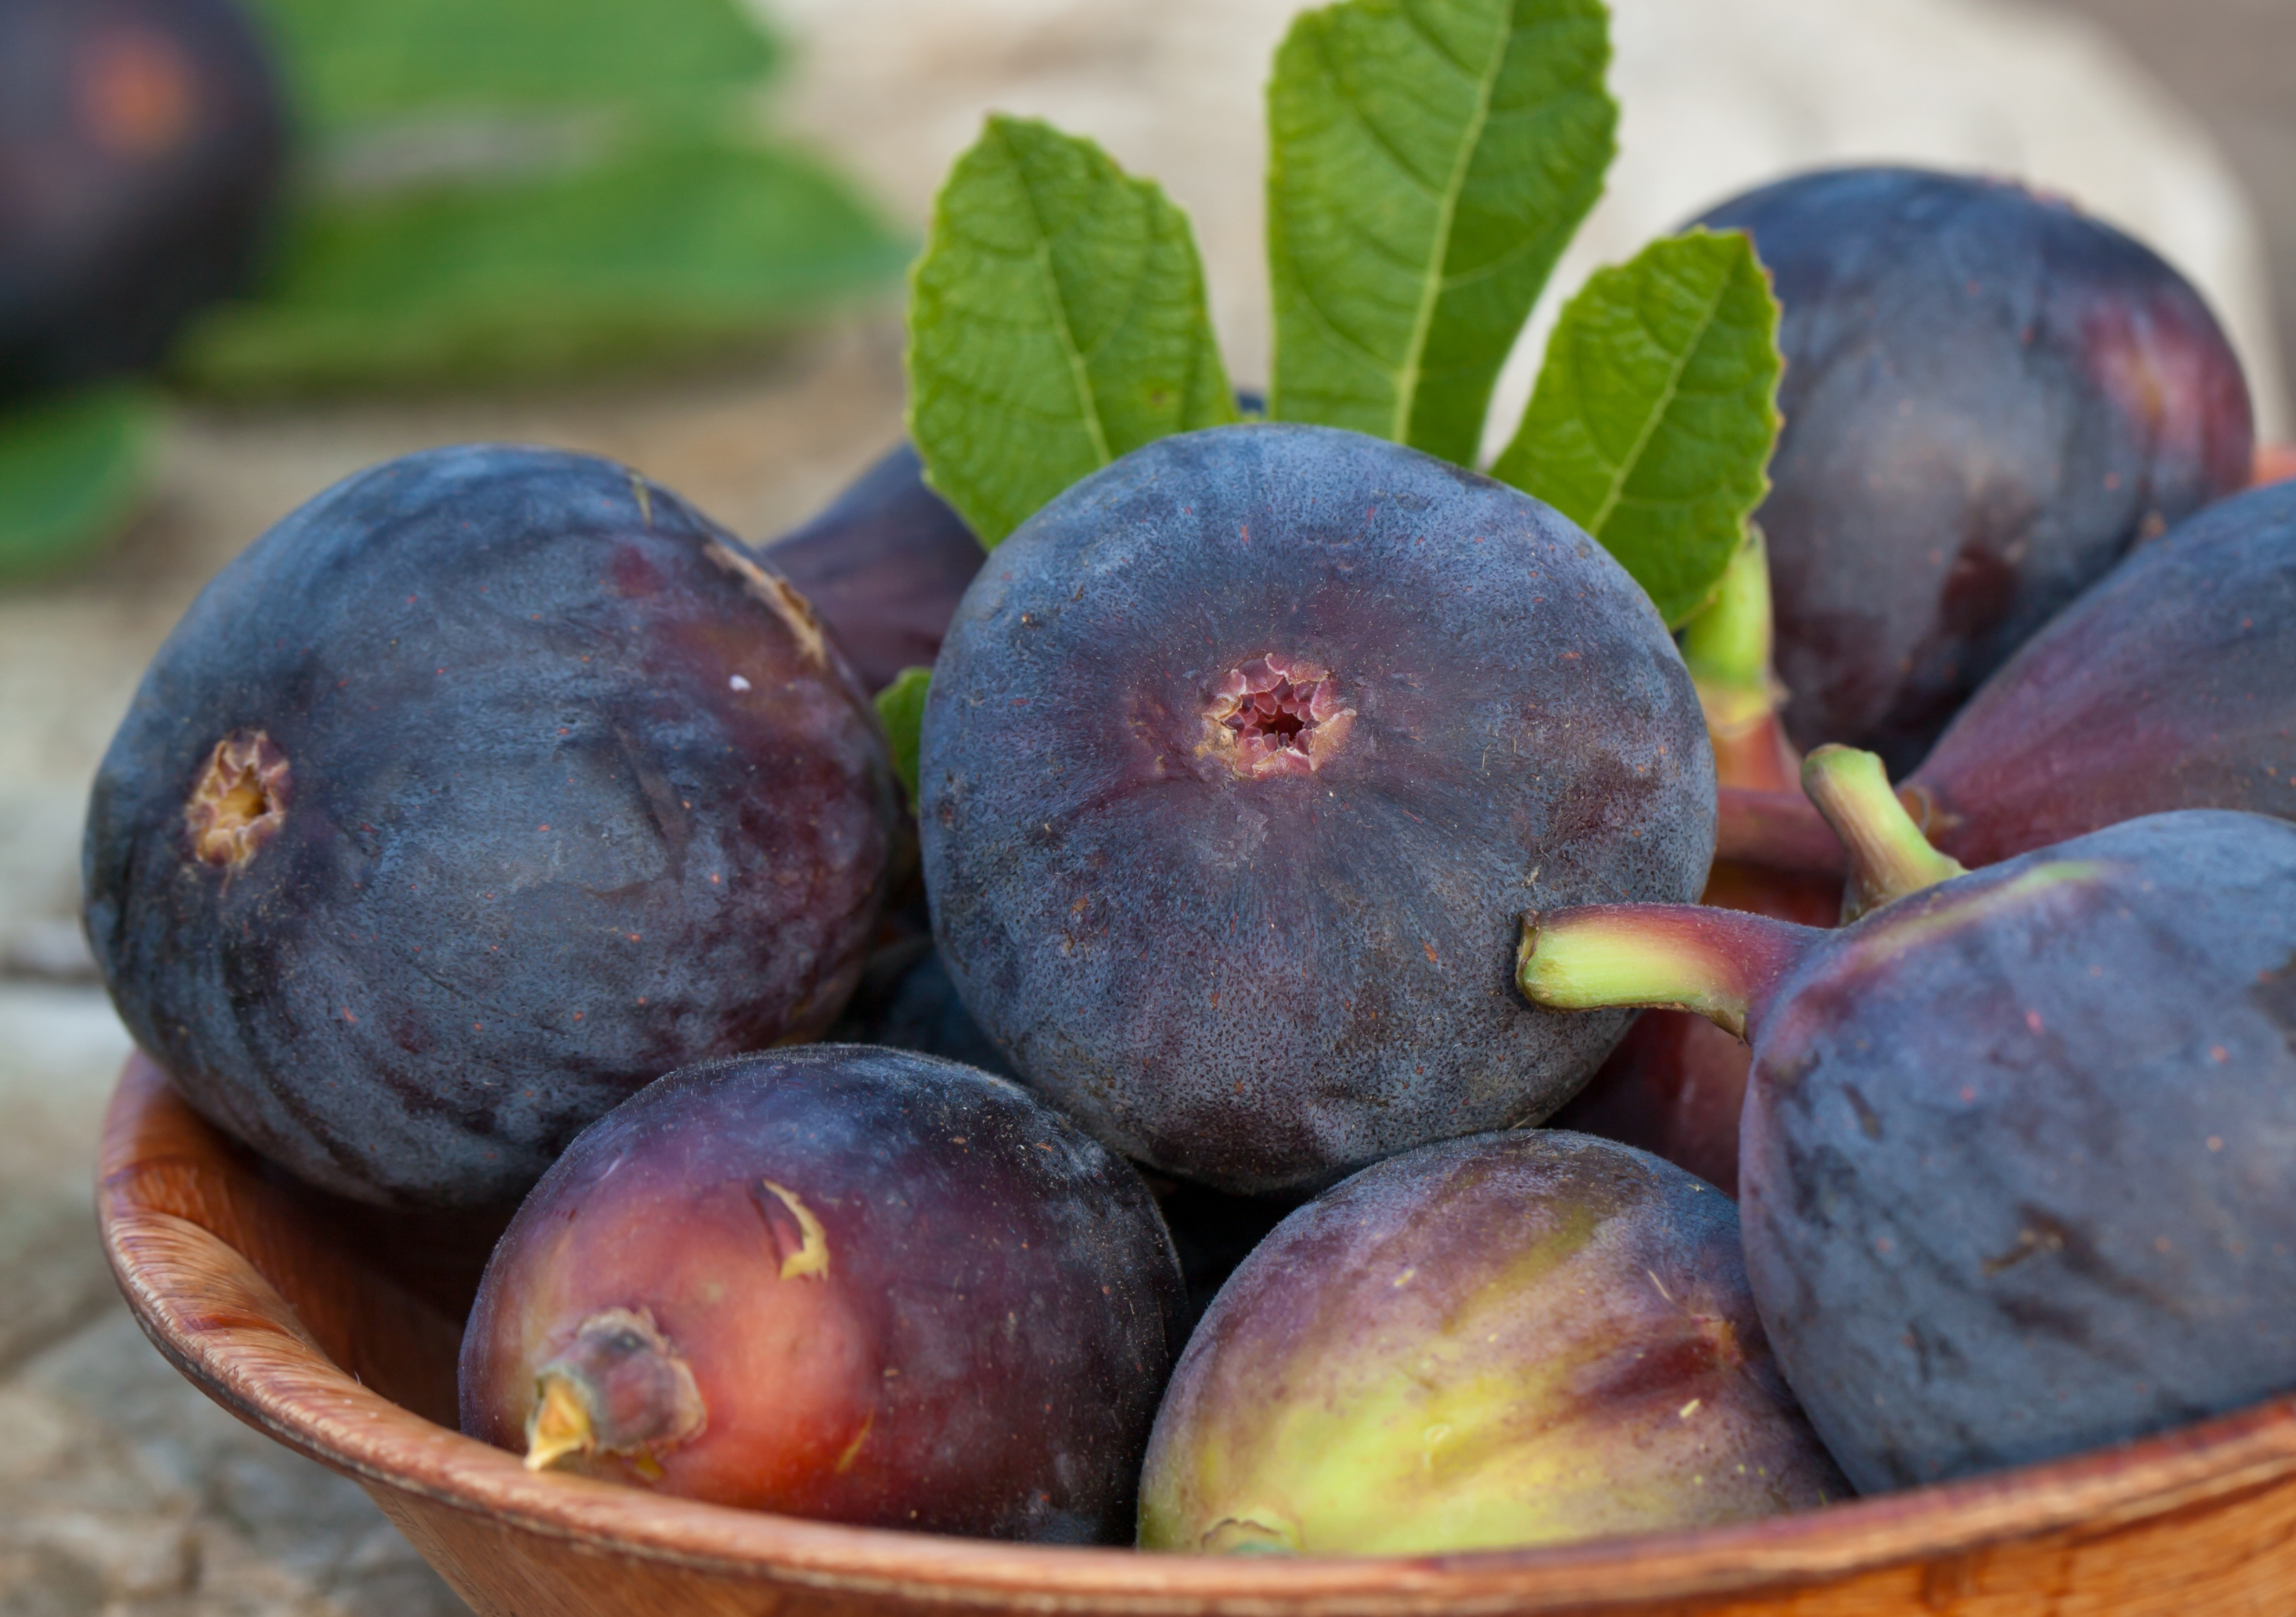 Figs are extremely nutritious.